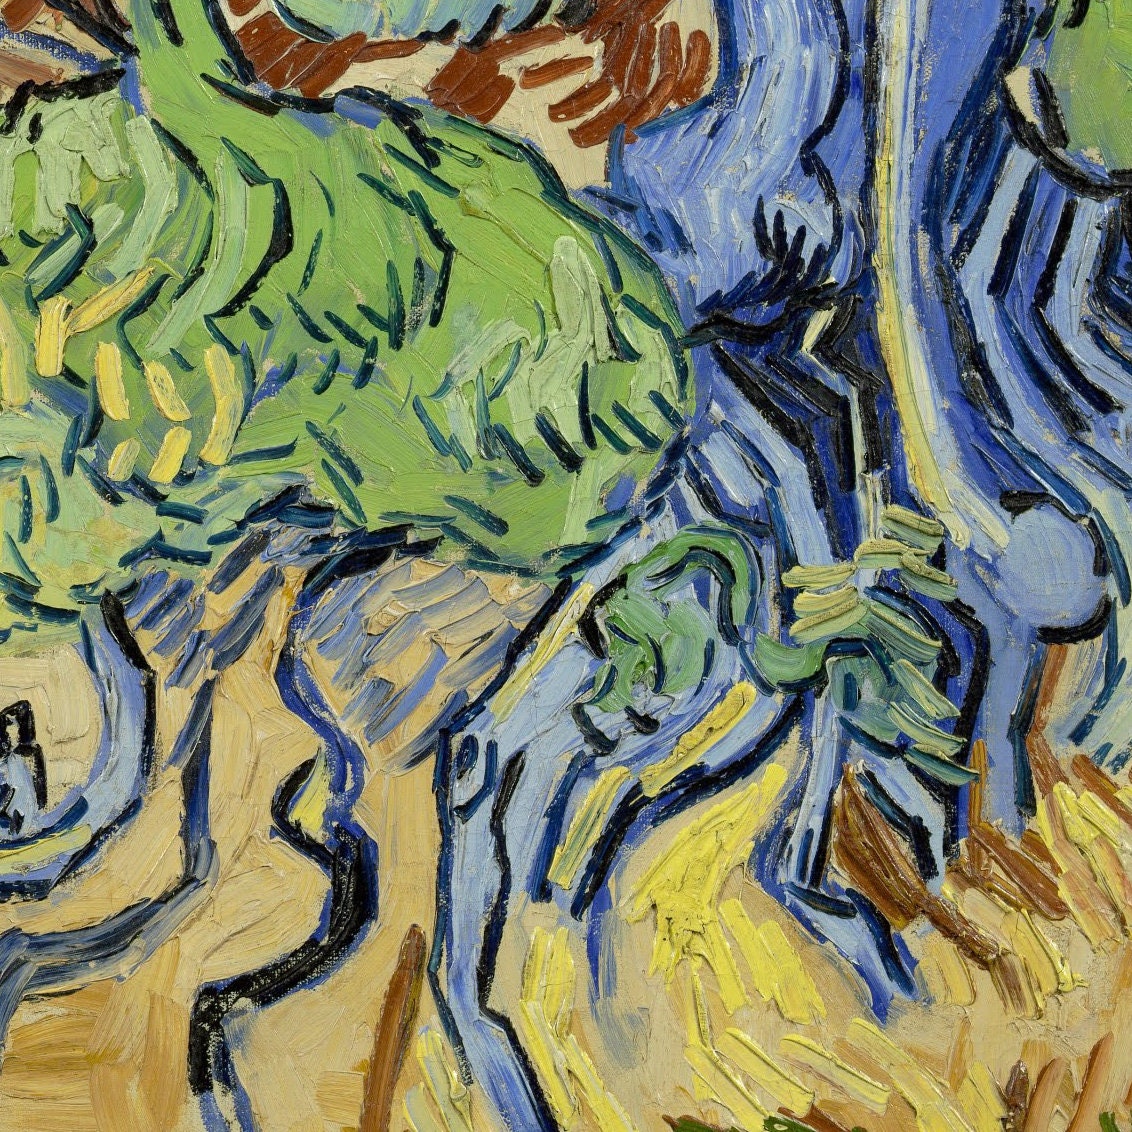 Tree Roots by Van Gogh, 3d Printed with texture and brush strokes looks like original oil-painting, code:485